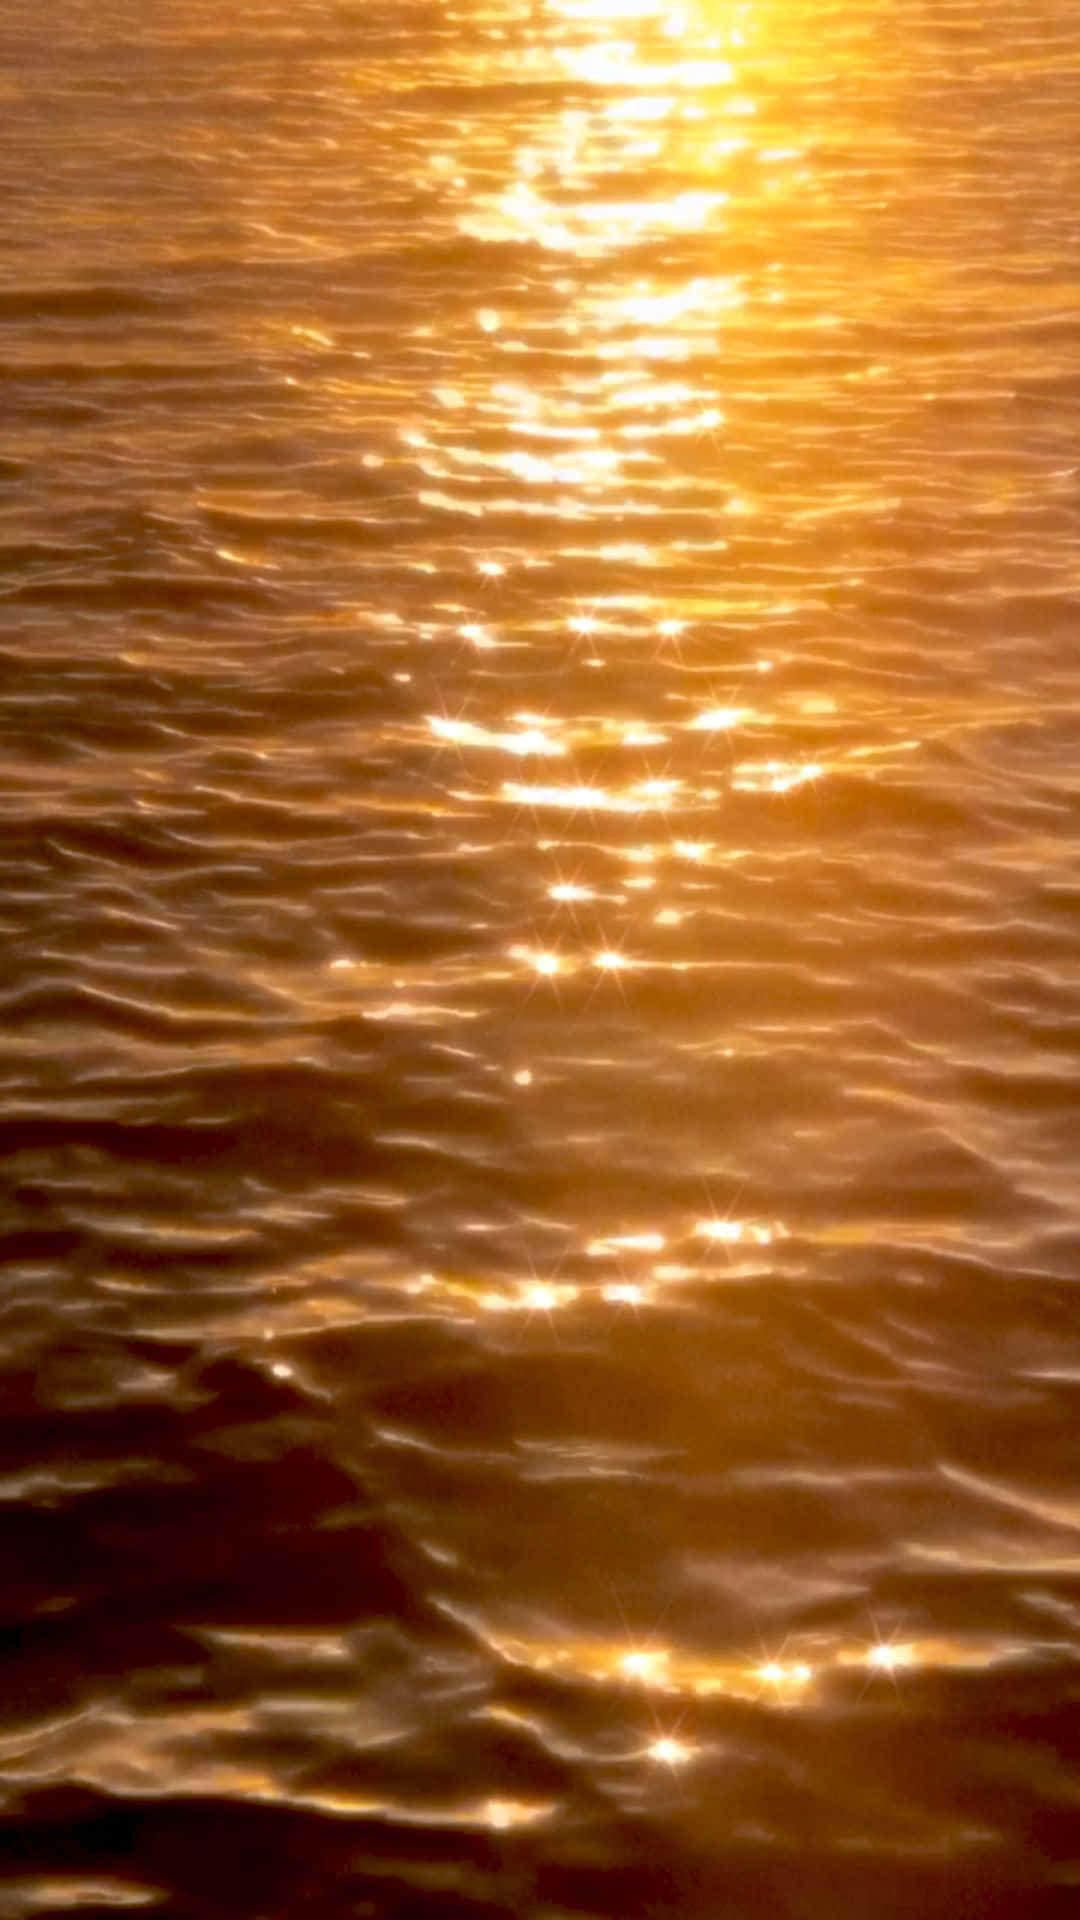 A Sunset Over The Water With A Sun Shining On It